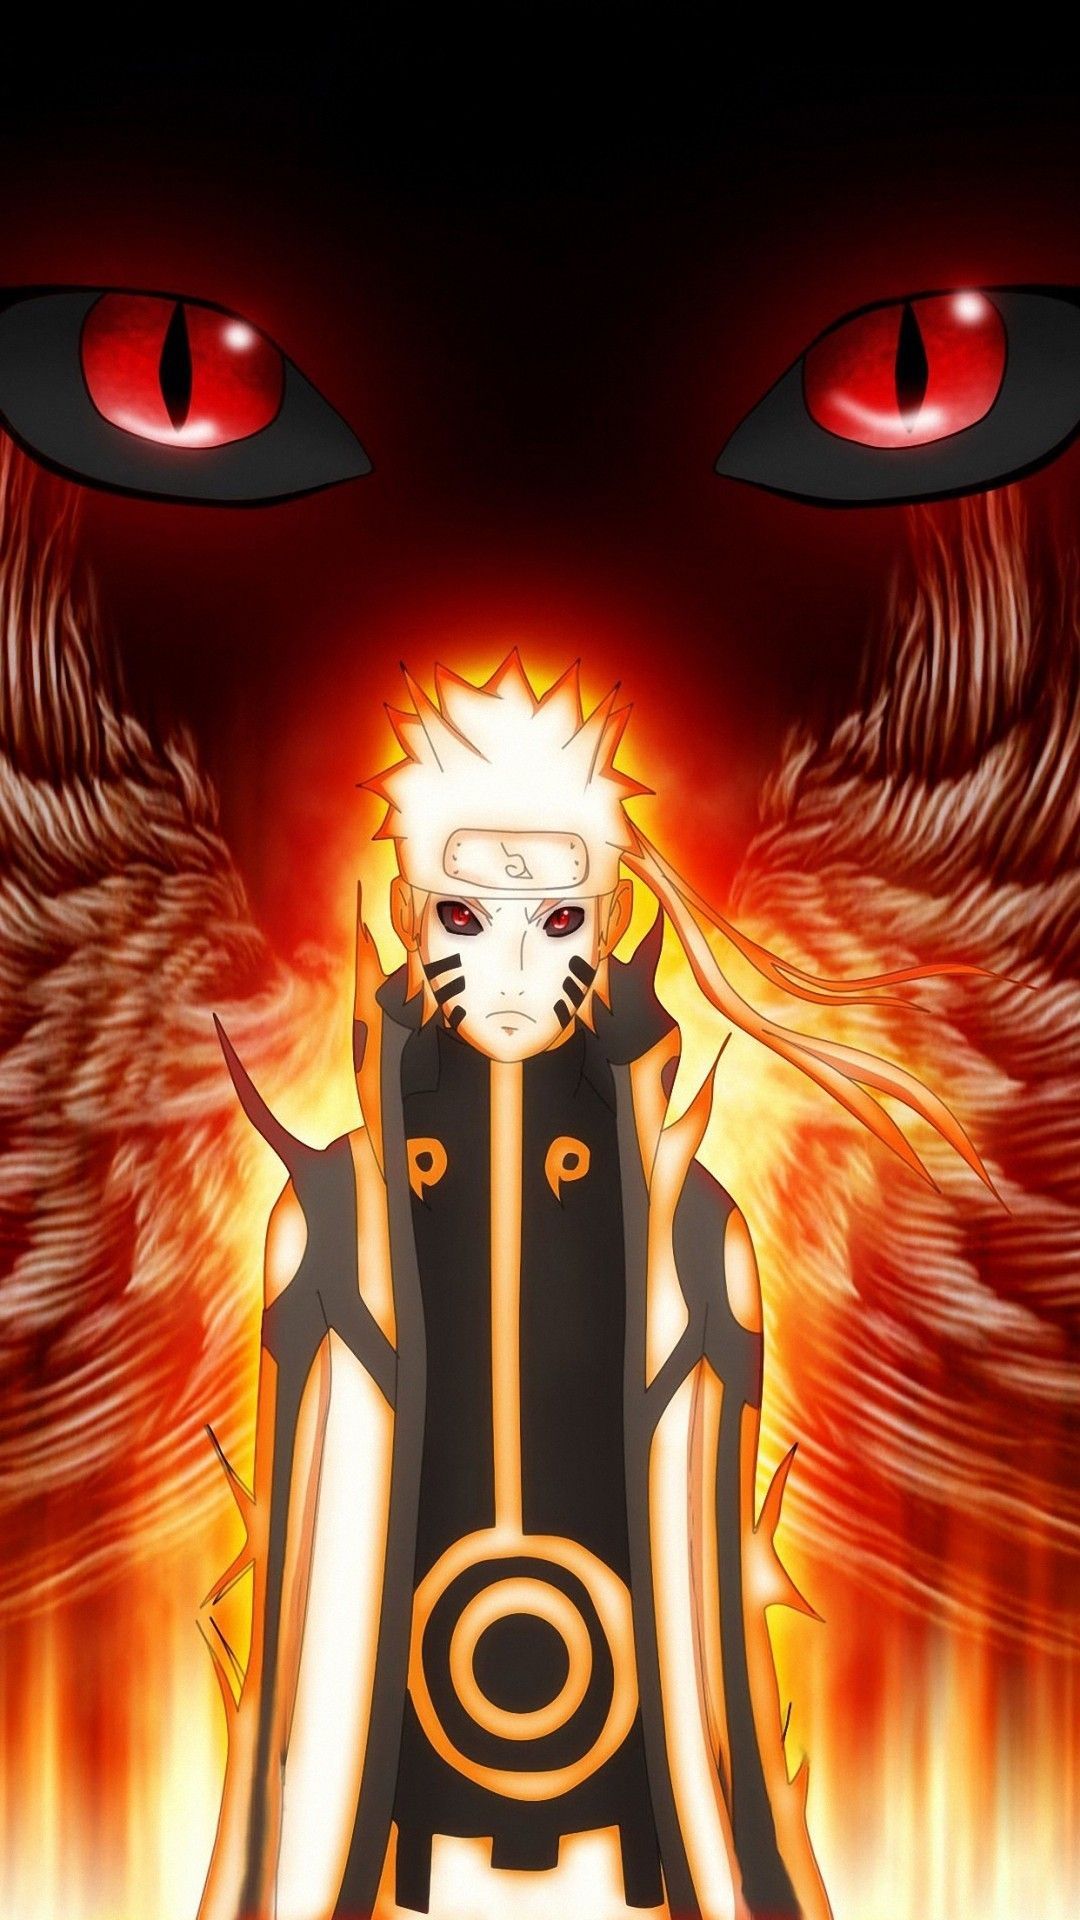 Naruto Nine Tails Mode Wallpaper posted .cutewallpaper.org